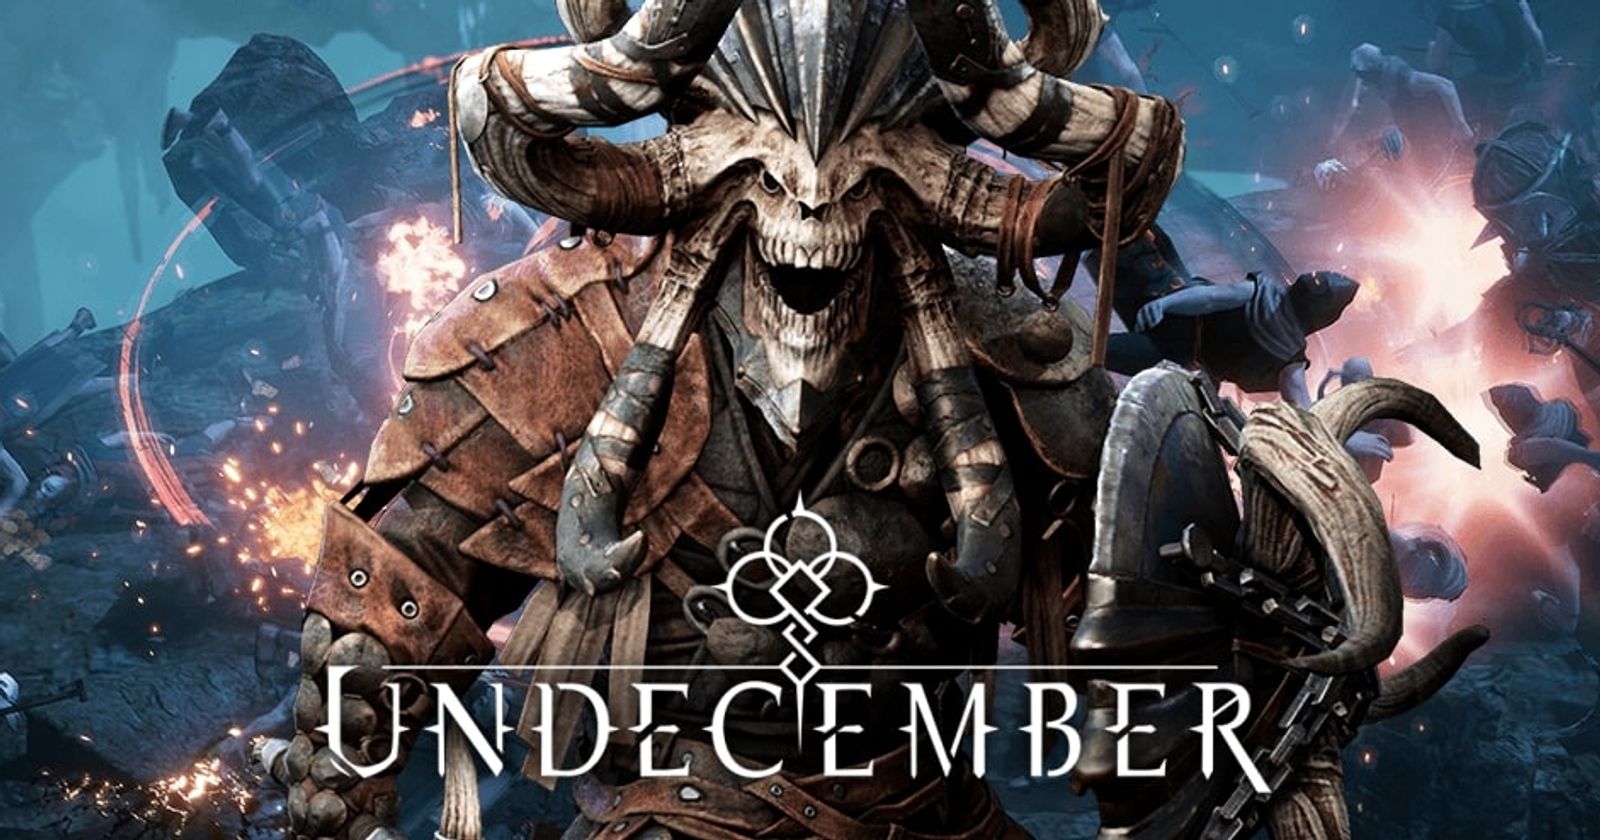 Undecember: Builds - which are the best?